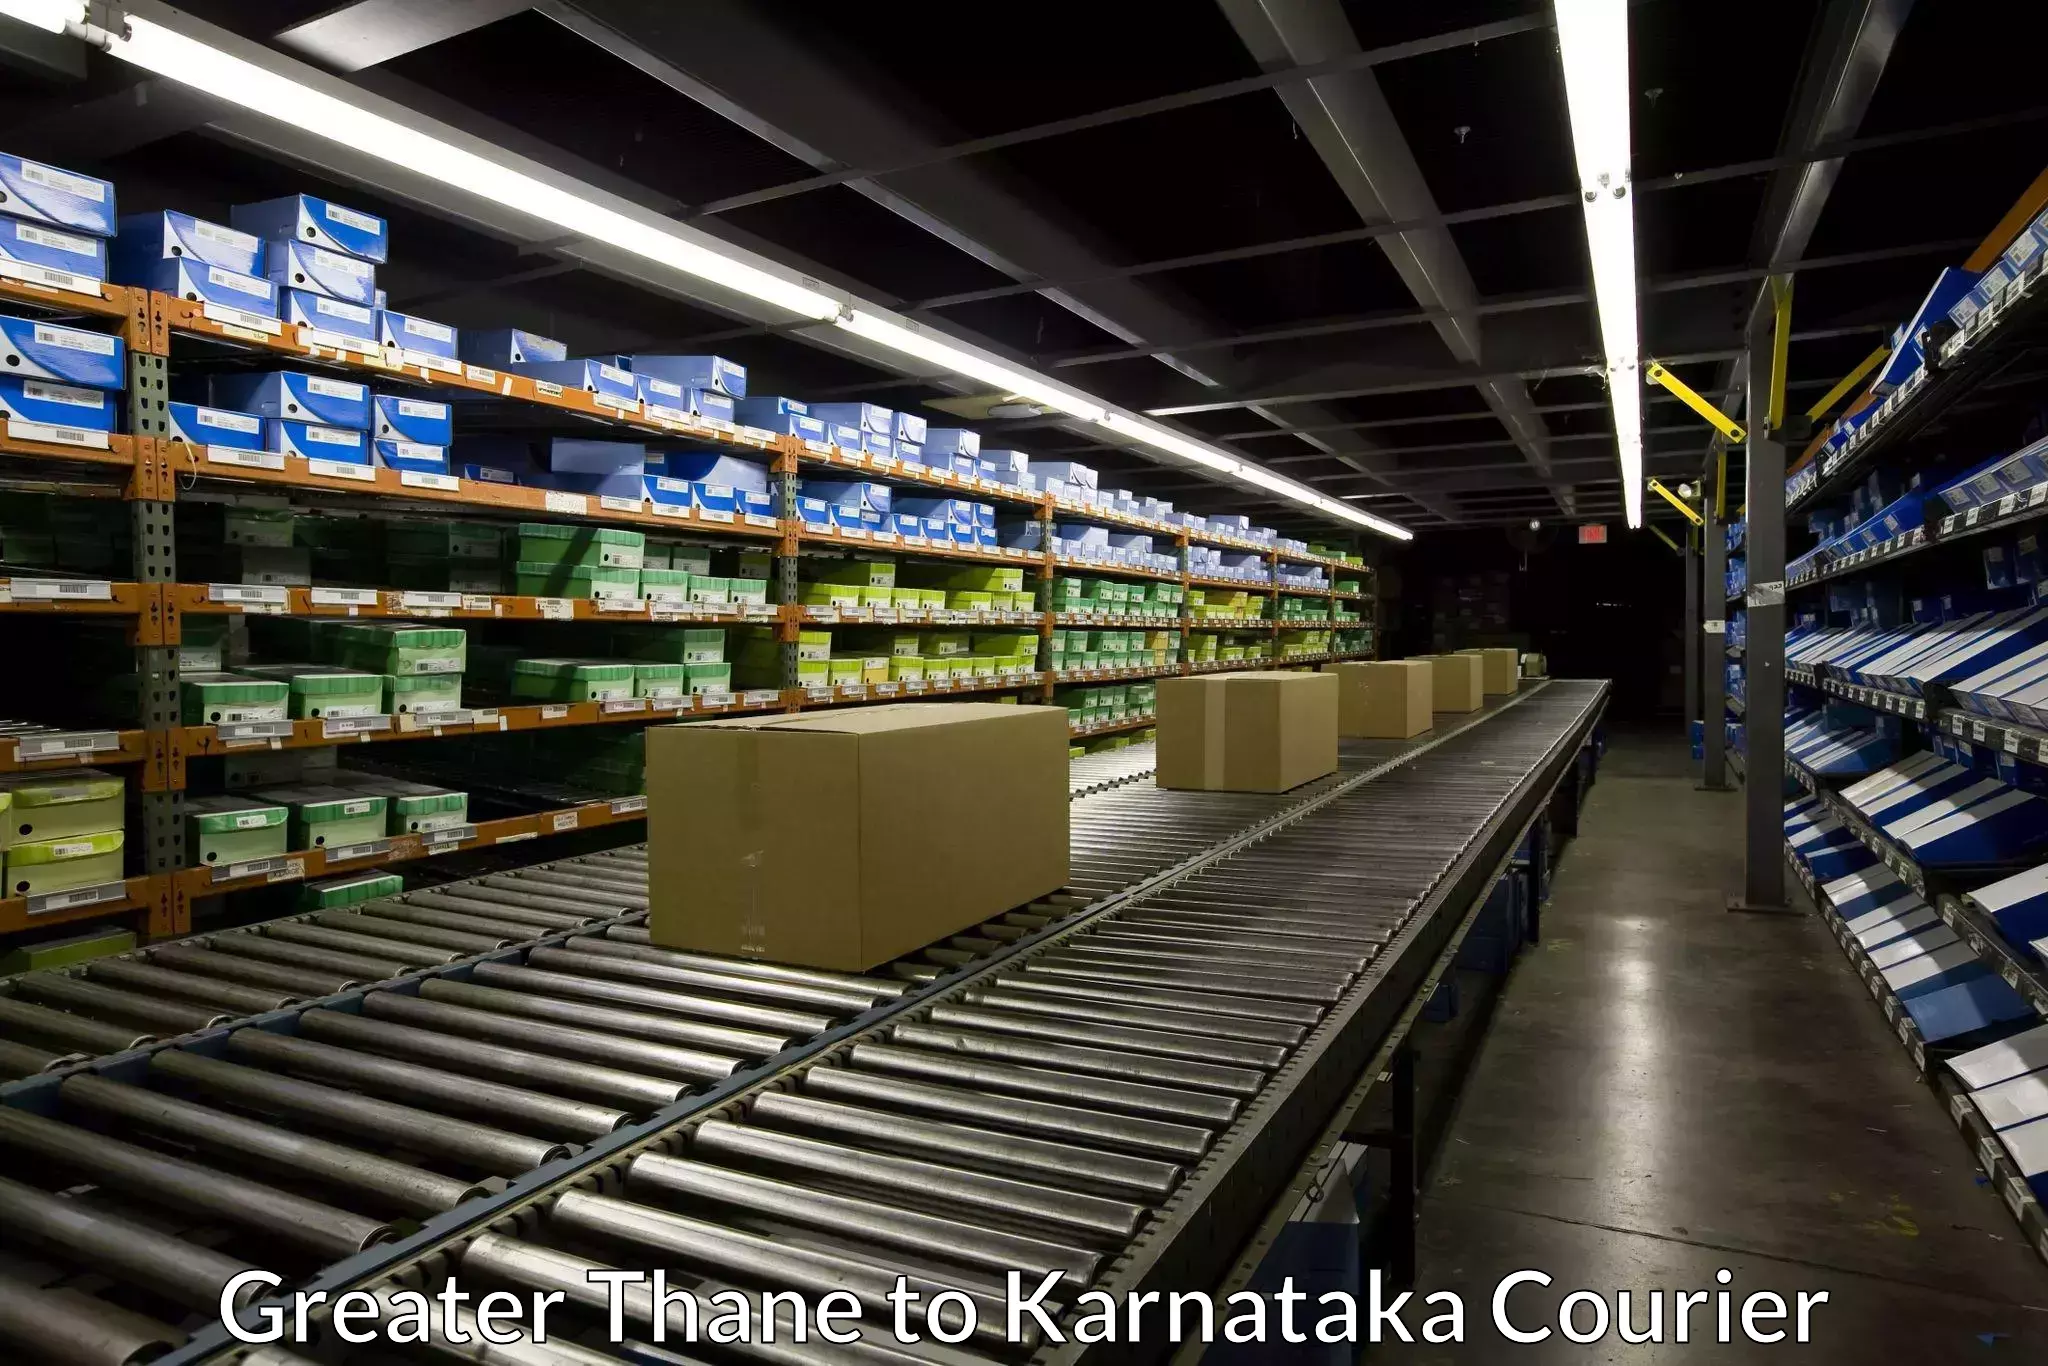 Package tracking in Greater Thane to Karnataka